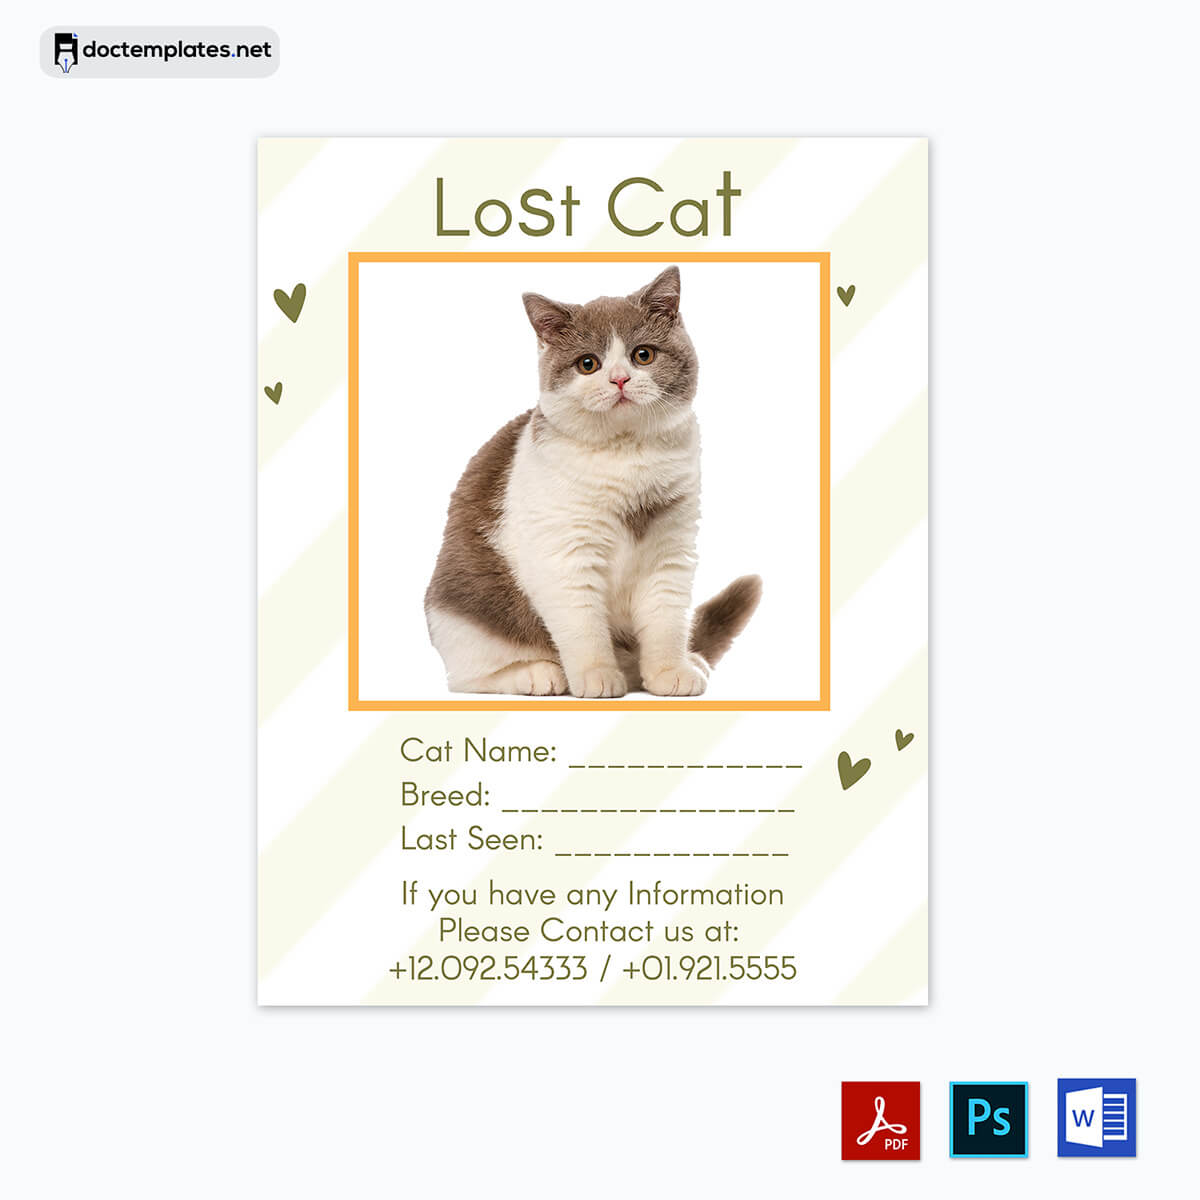 "Word Template for Pet Search" - Use Microsoft Word to create an effective flyer for finding missing cats and dogs.